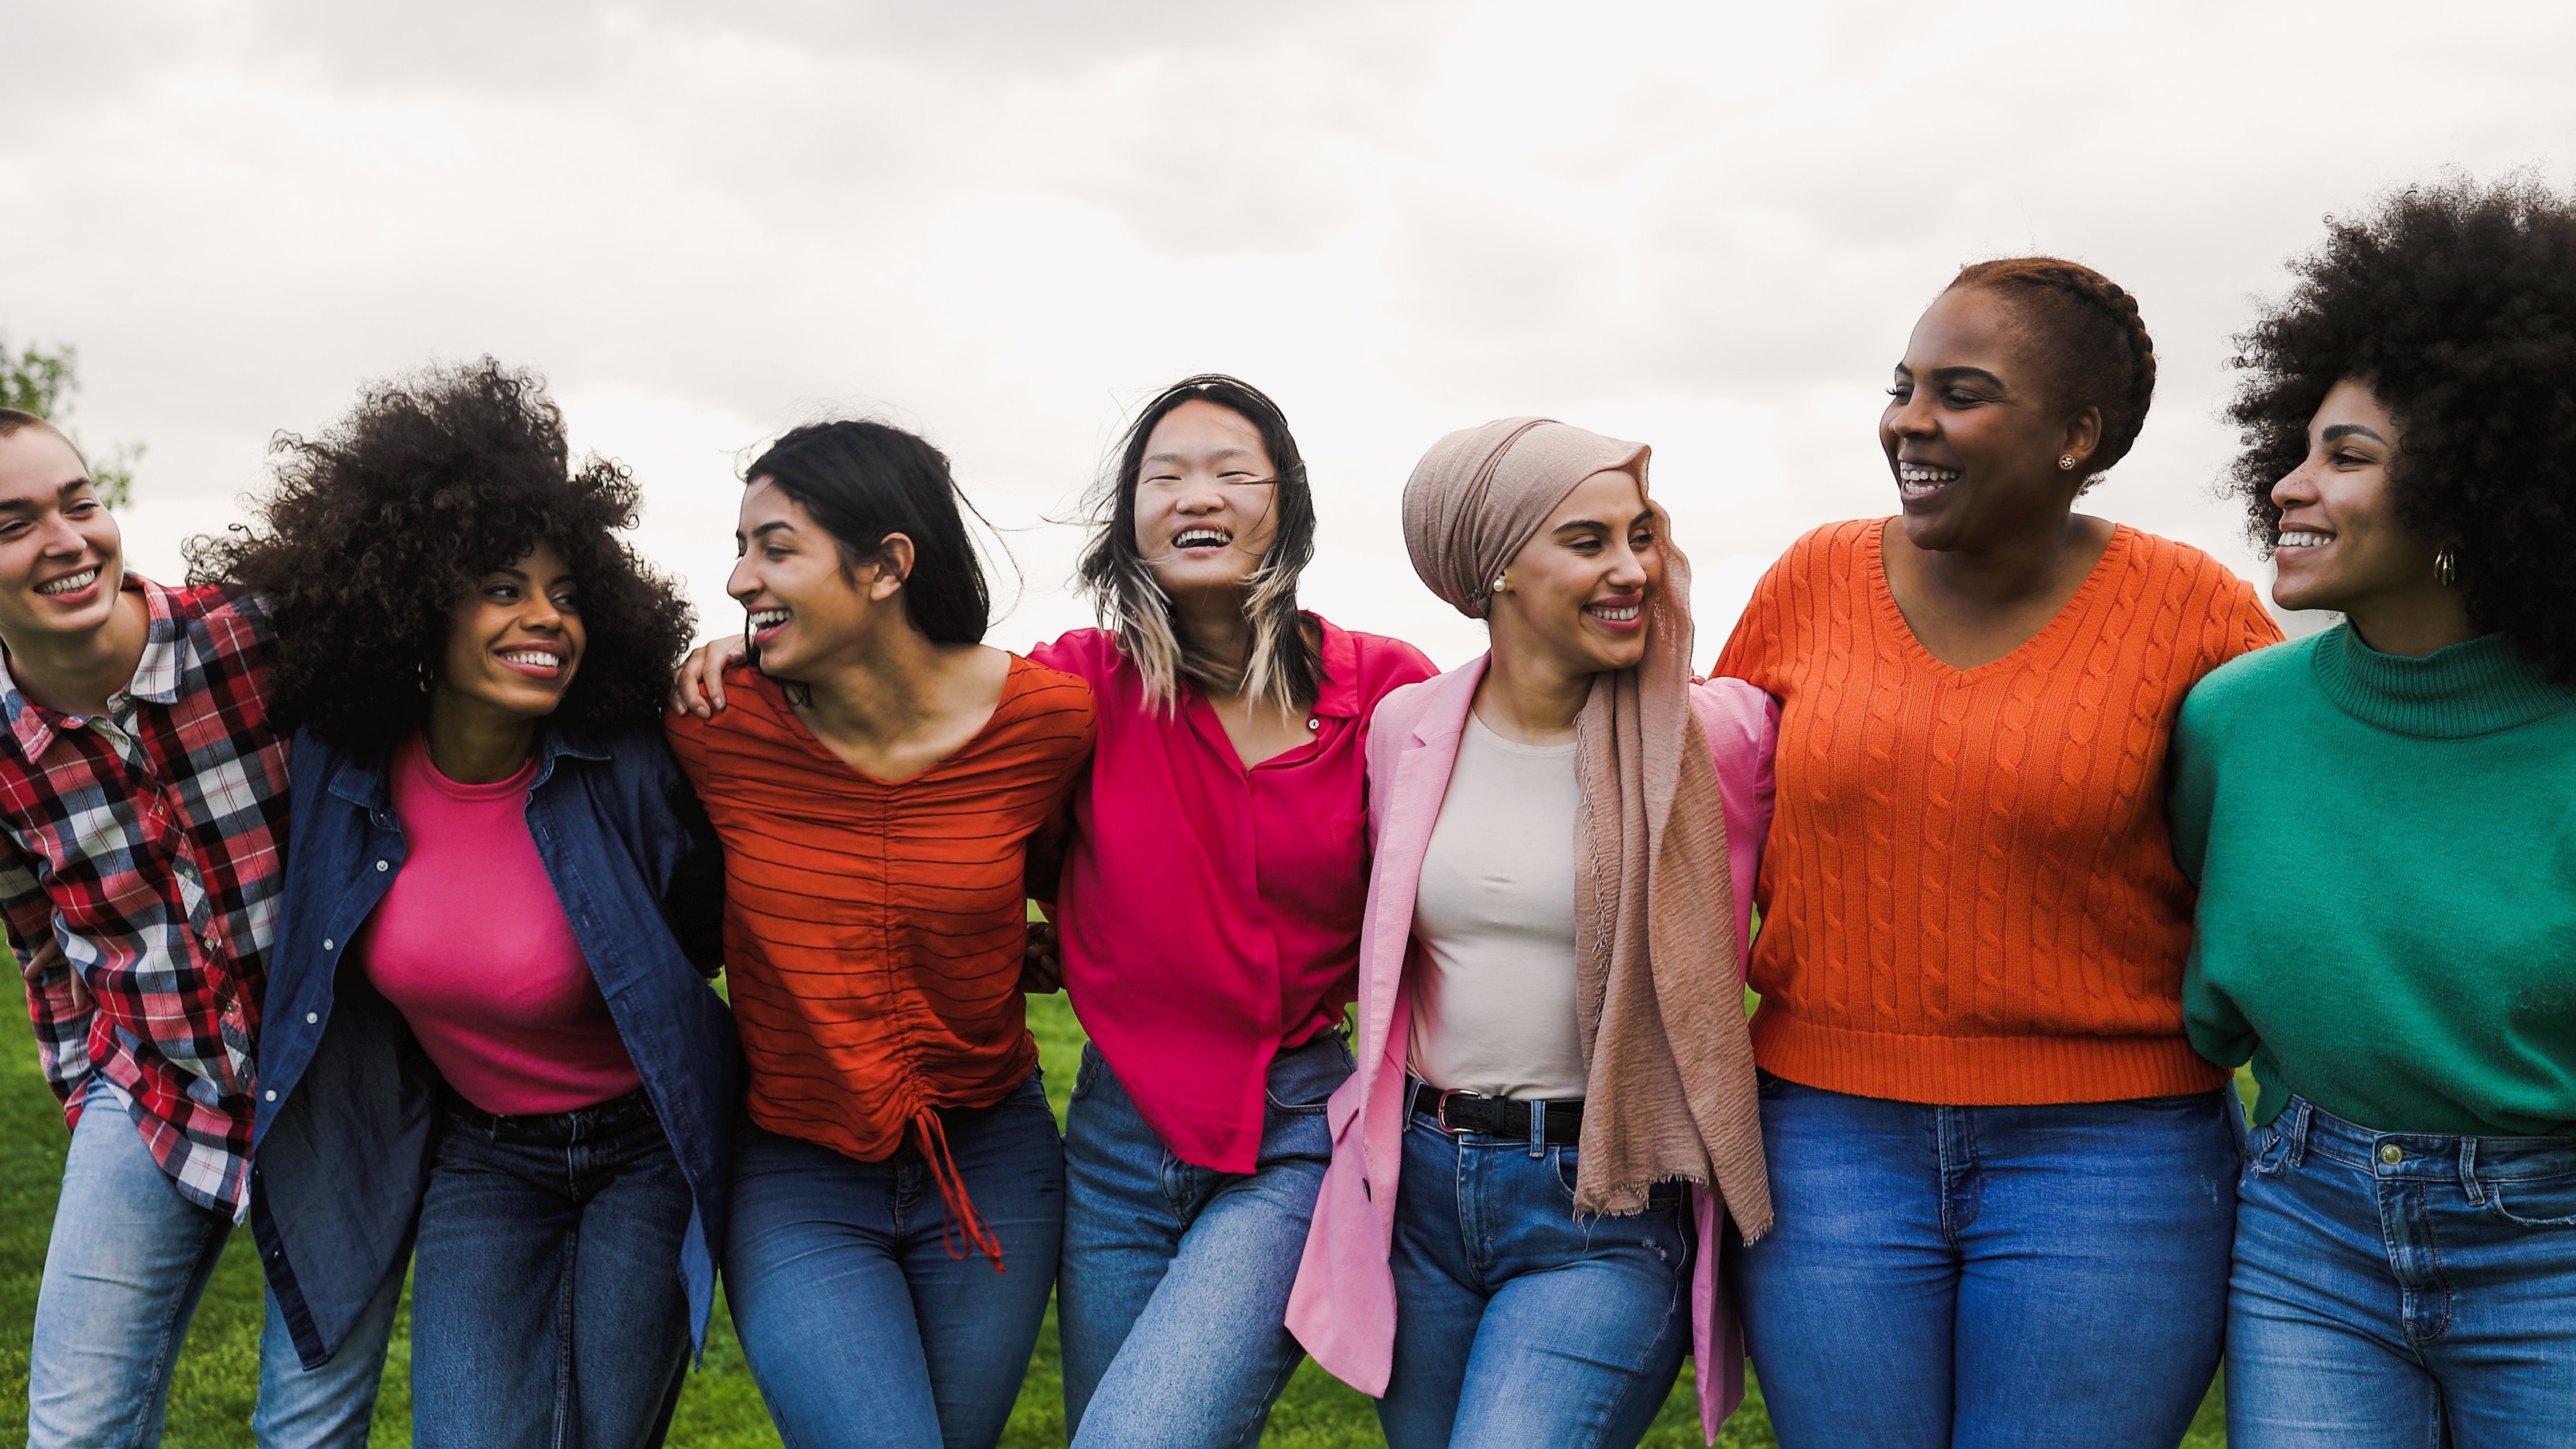 Seven women of different backgrounds have their arms around each other outside. They are dressed in bright colours and smiling.